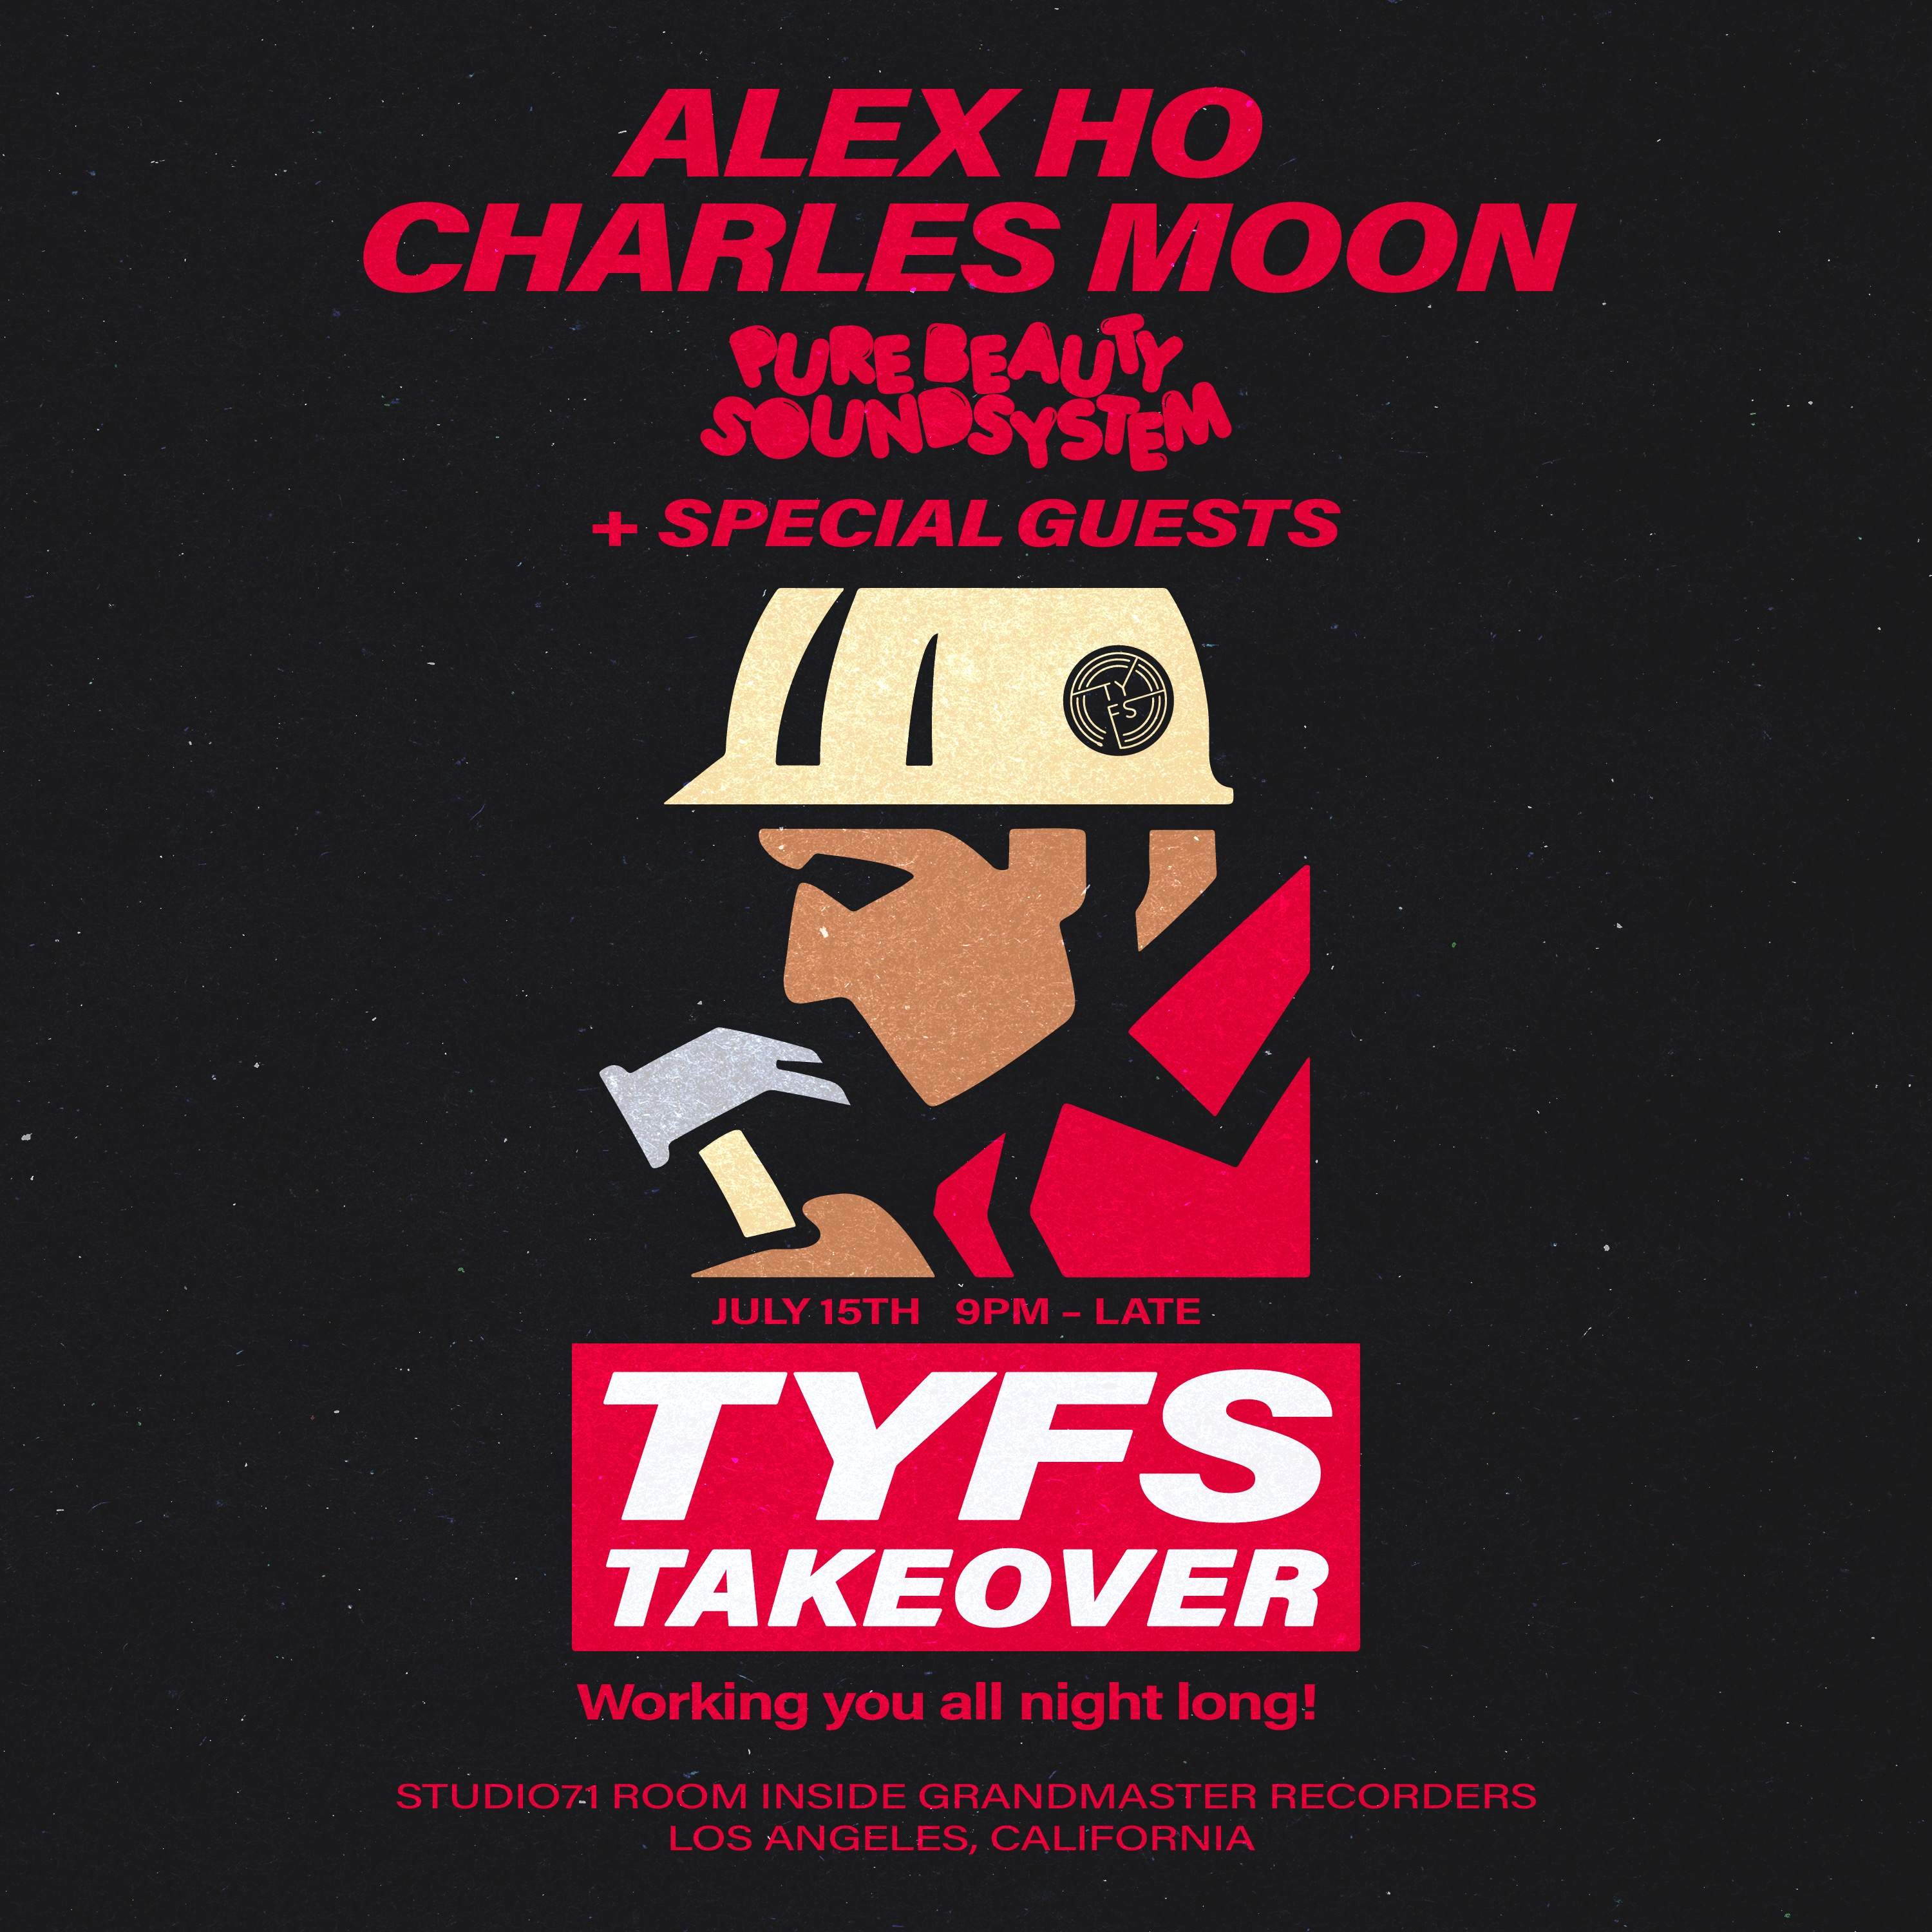 TYFS TAKEOVER with Alex Ho, Charles Moon, Pure Beauty Soundsystem + Special Guests - Página trasera